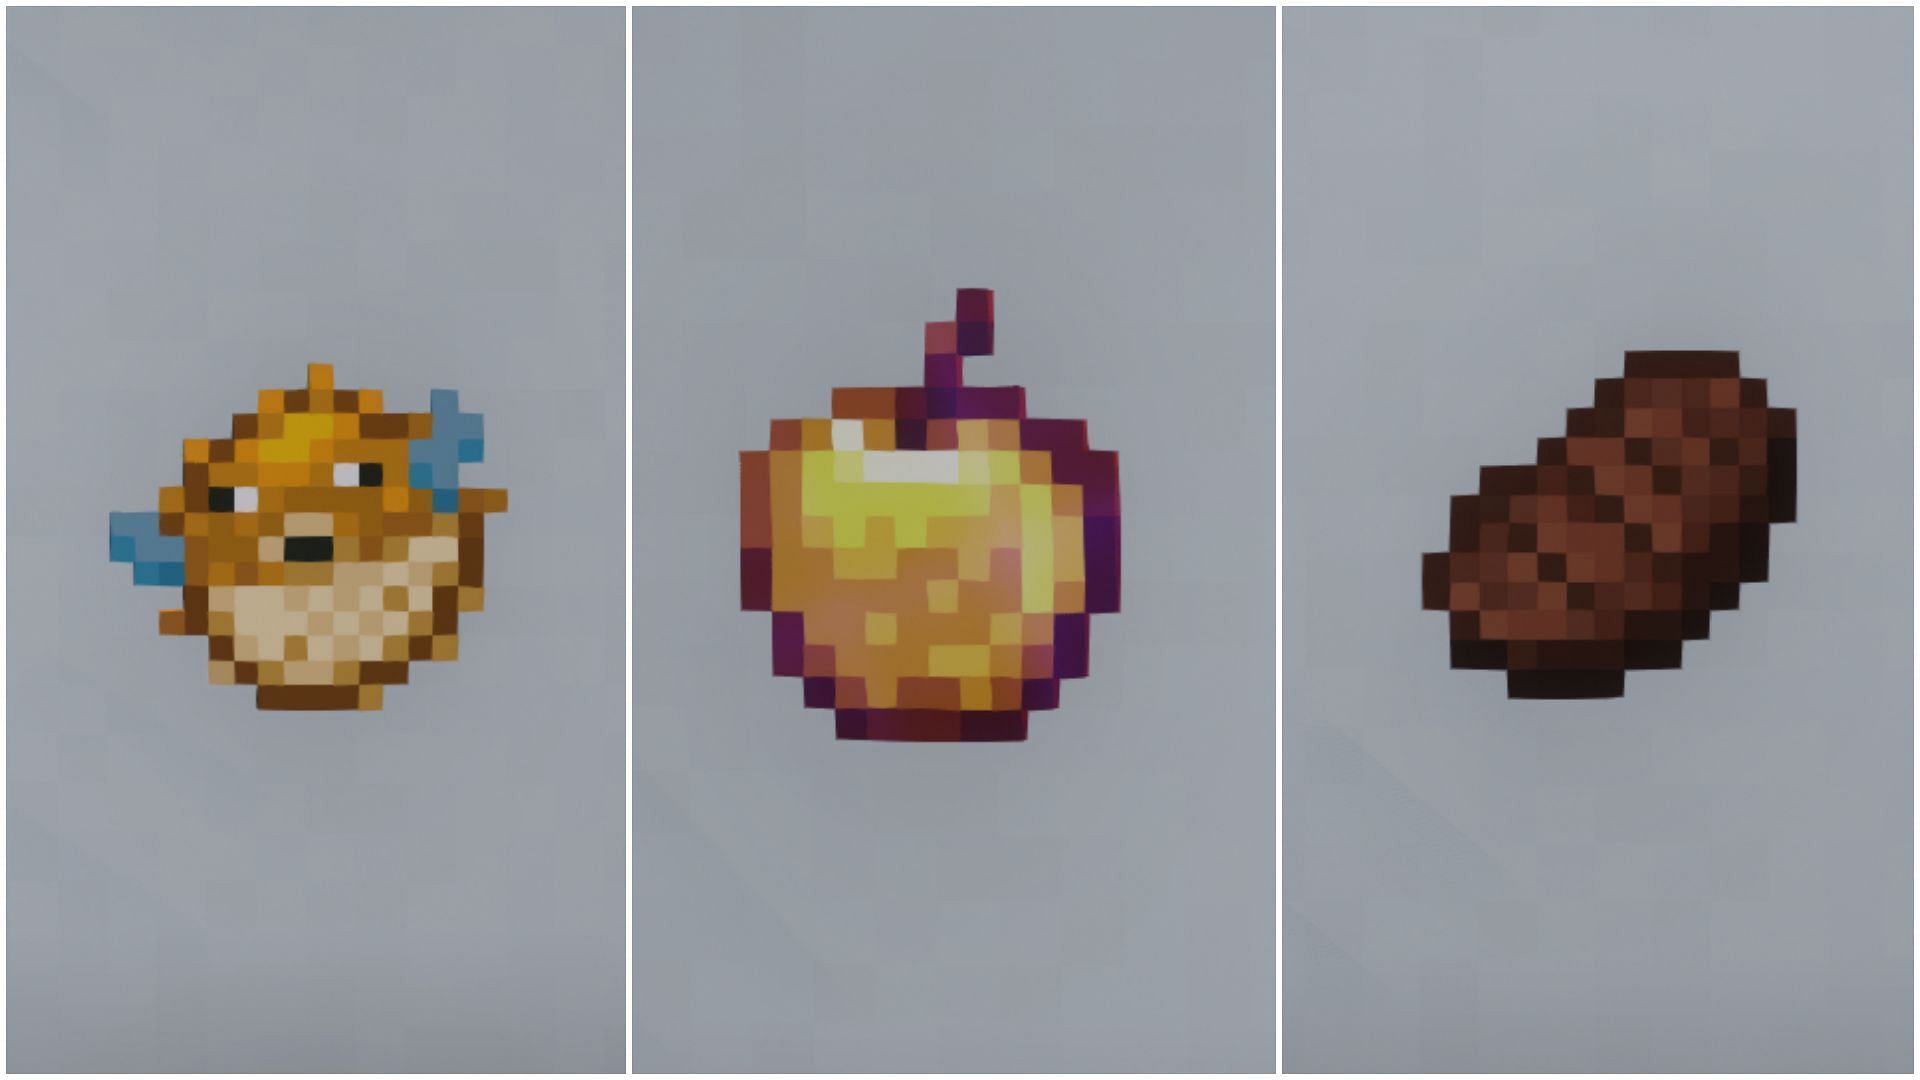 There are many types of food items that players can eat in Minecraft (Image via Sportskeeda)